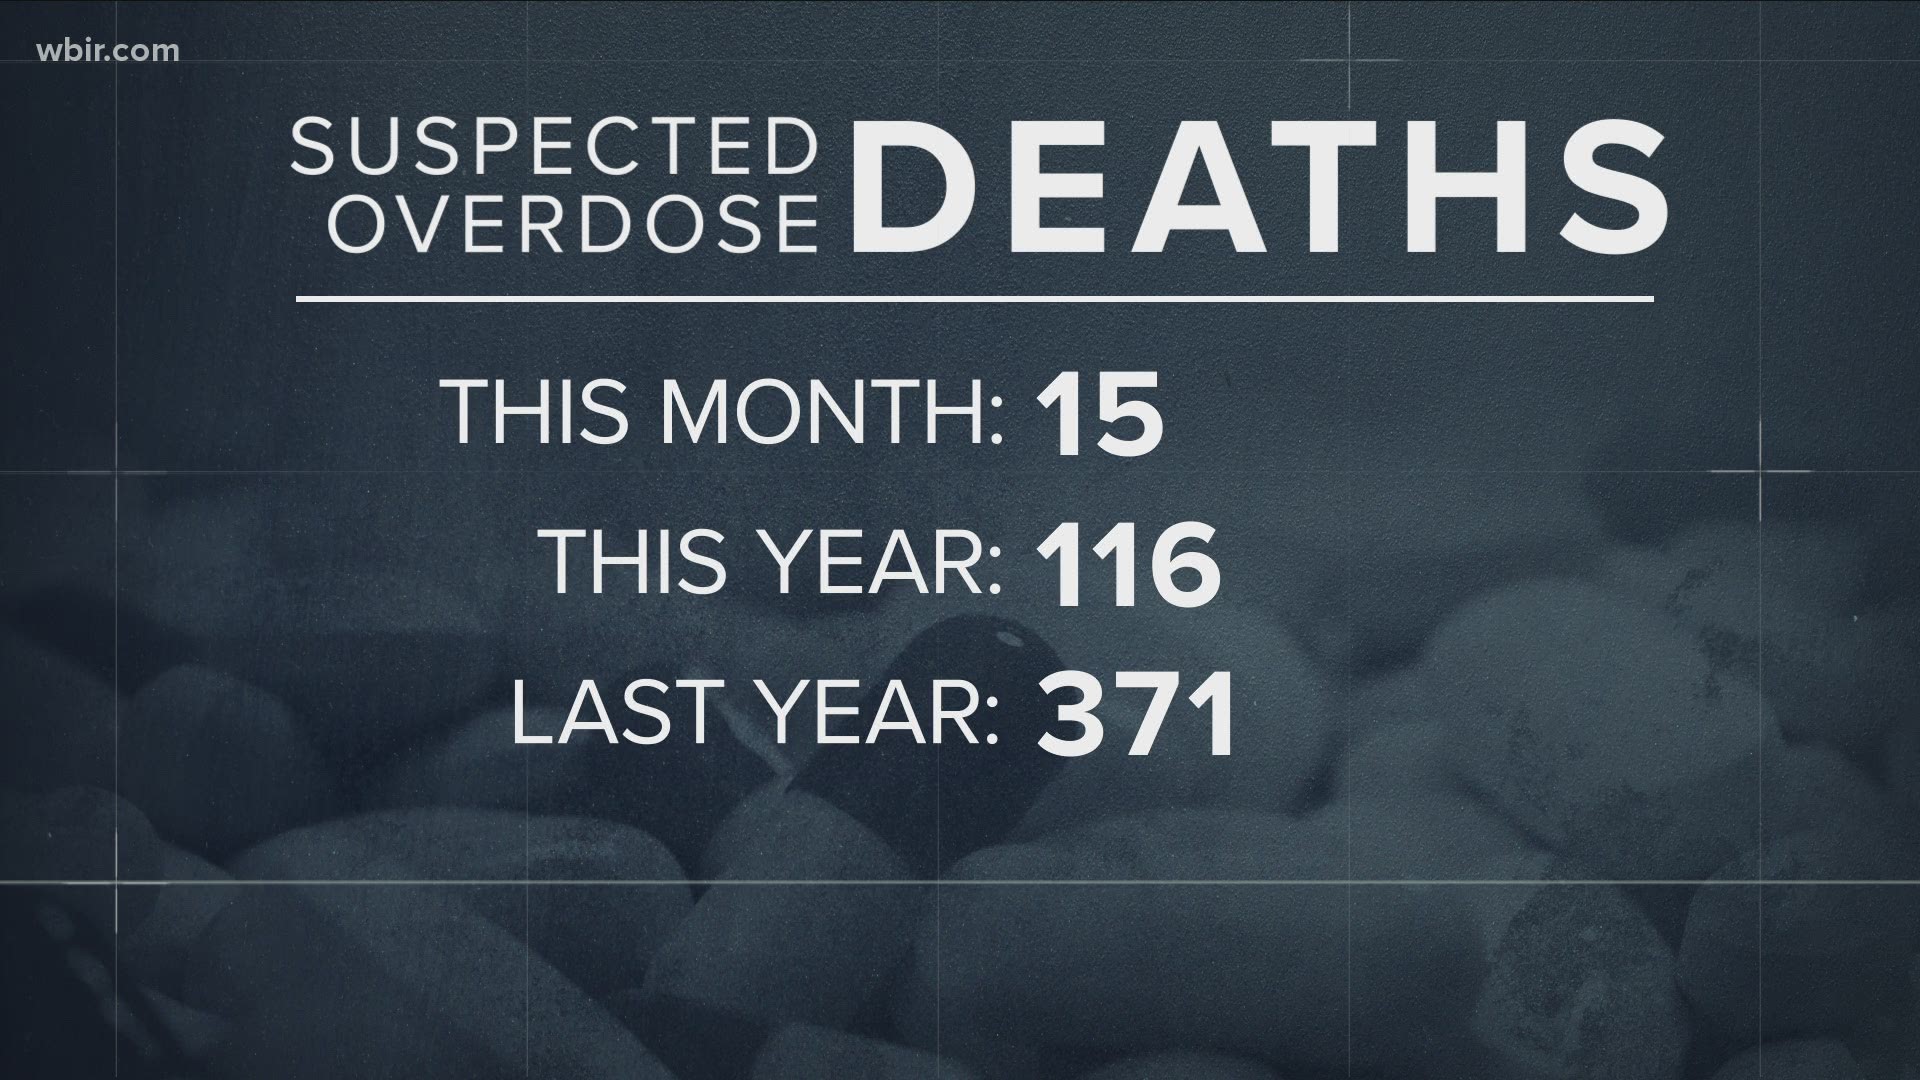 In Knox County, 15 people have died of a suspected overdose so far this month.